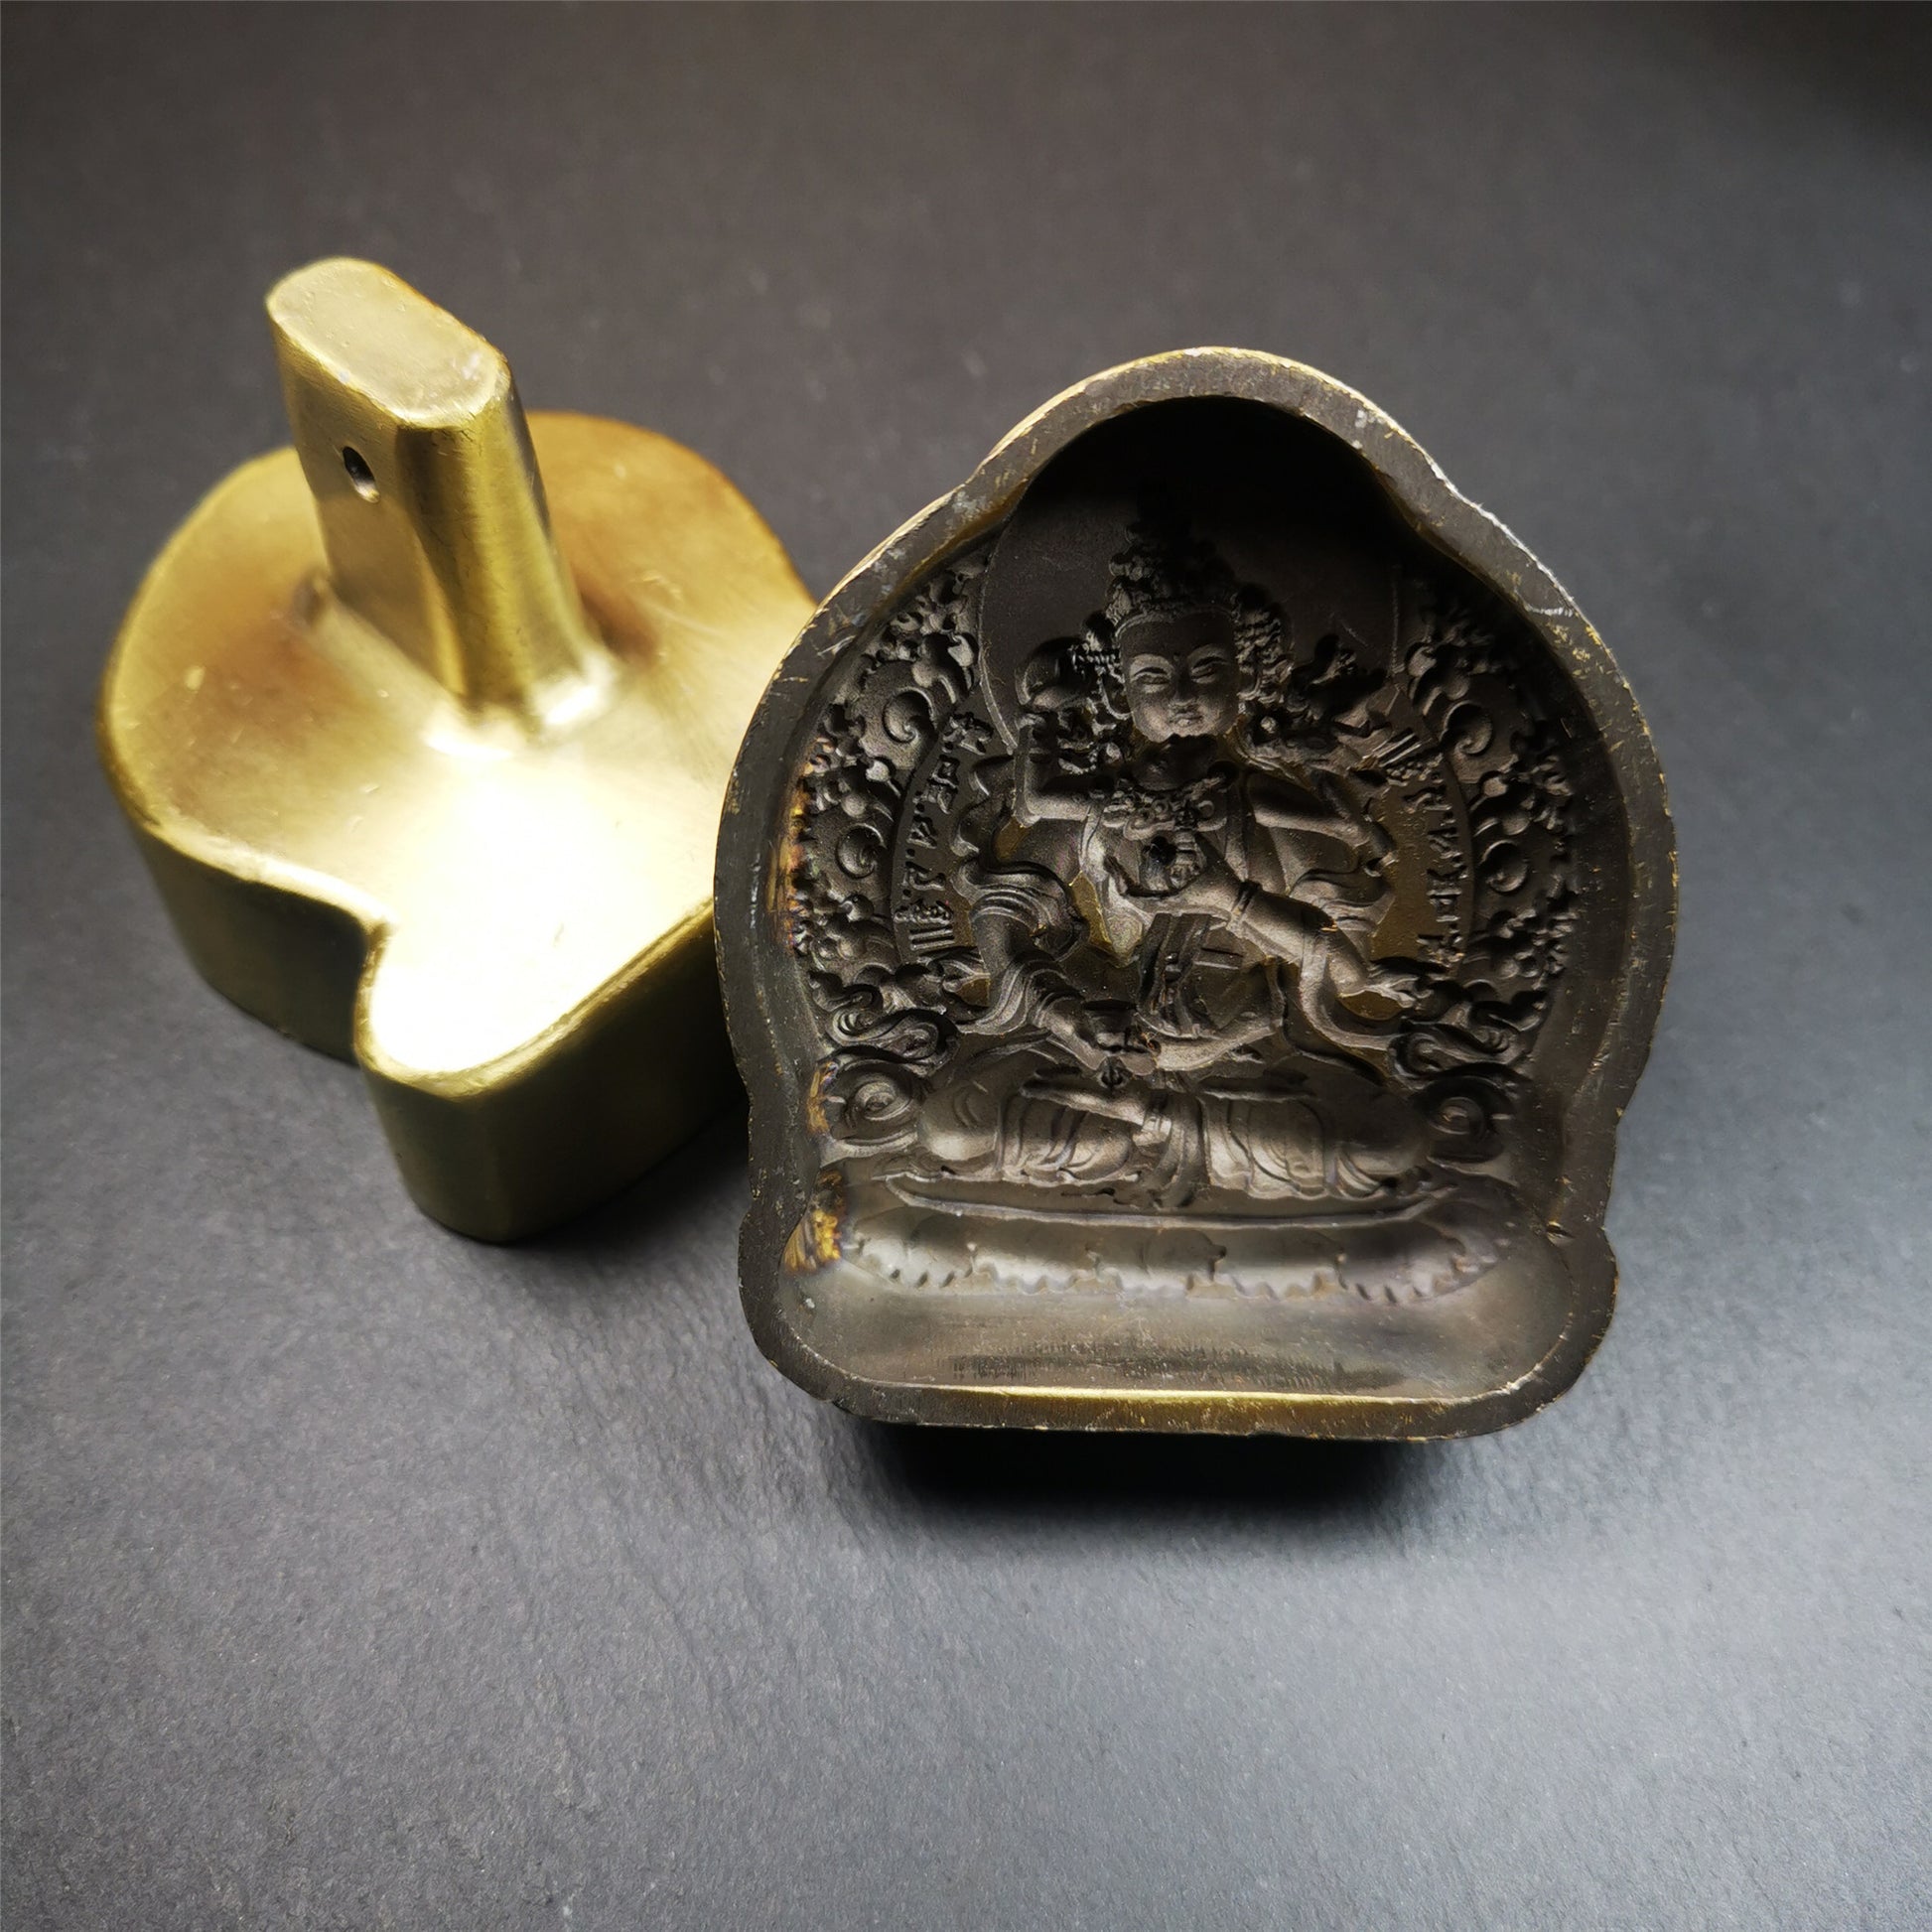 This Vajrasattva Tsa-Tsa is made by Tibetan craftsmen in Hepo Town, Baiyu County. It is made of brass,yellow color,the shaple is Vajrasattva,about 2.8inches height. With this mold, you can use clay to make your own Buddha statue.